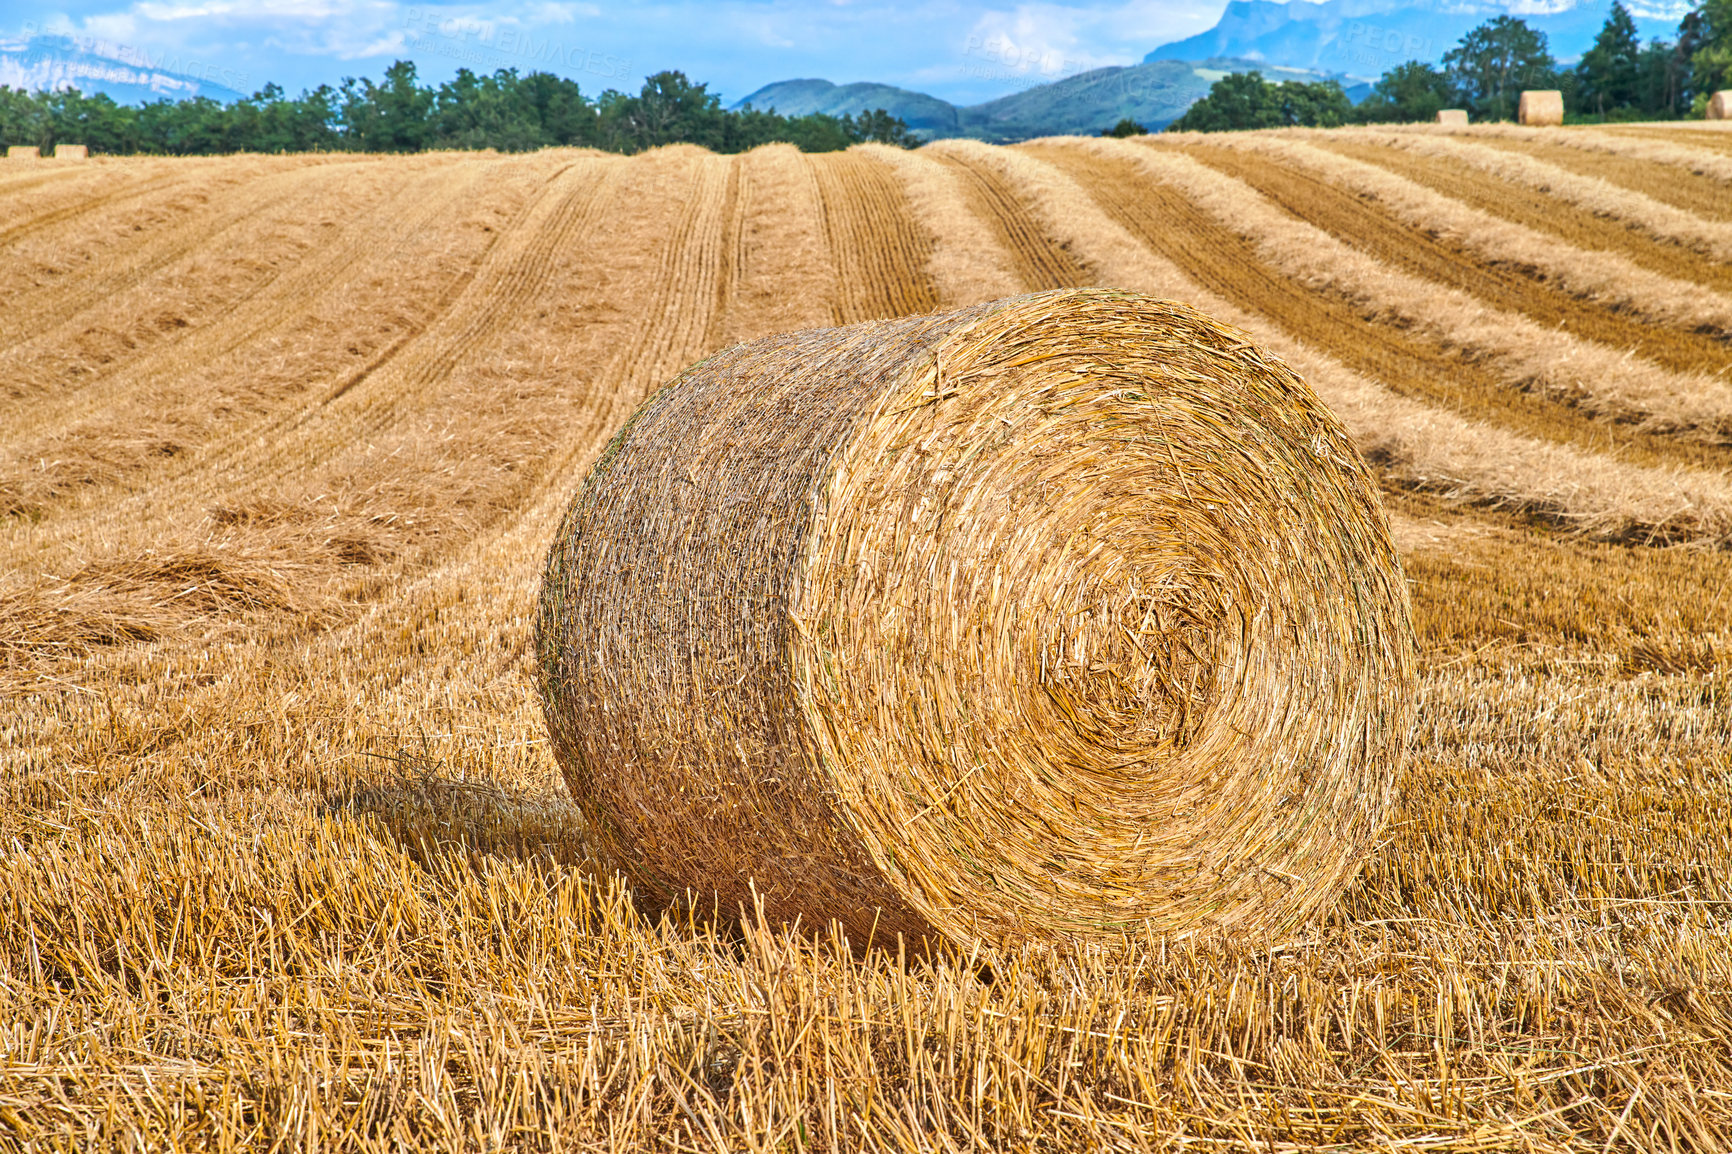 Buy stock photo Round hay bales of straw rolled on agricultural farm pasture and grain estate after harvesting wheat, rye or barley. Landscape view of a ploughed field and copy space background of rural Lyon, France